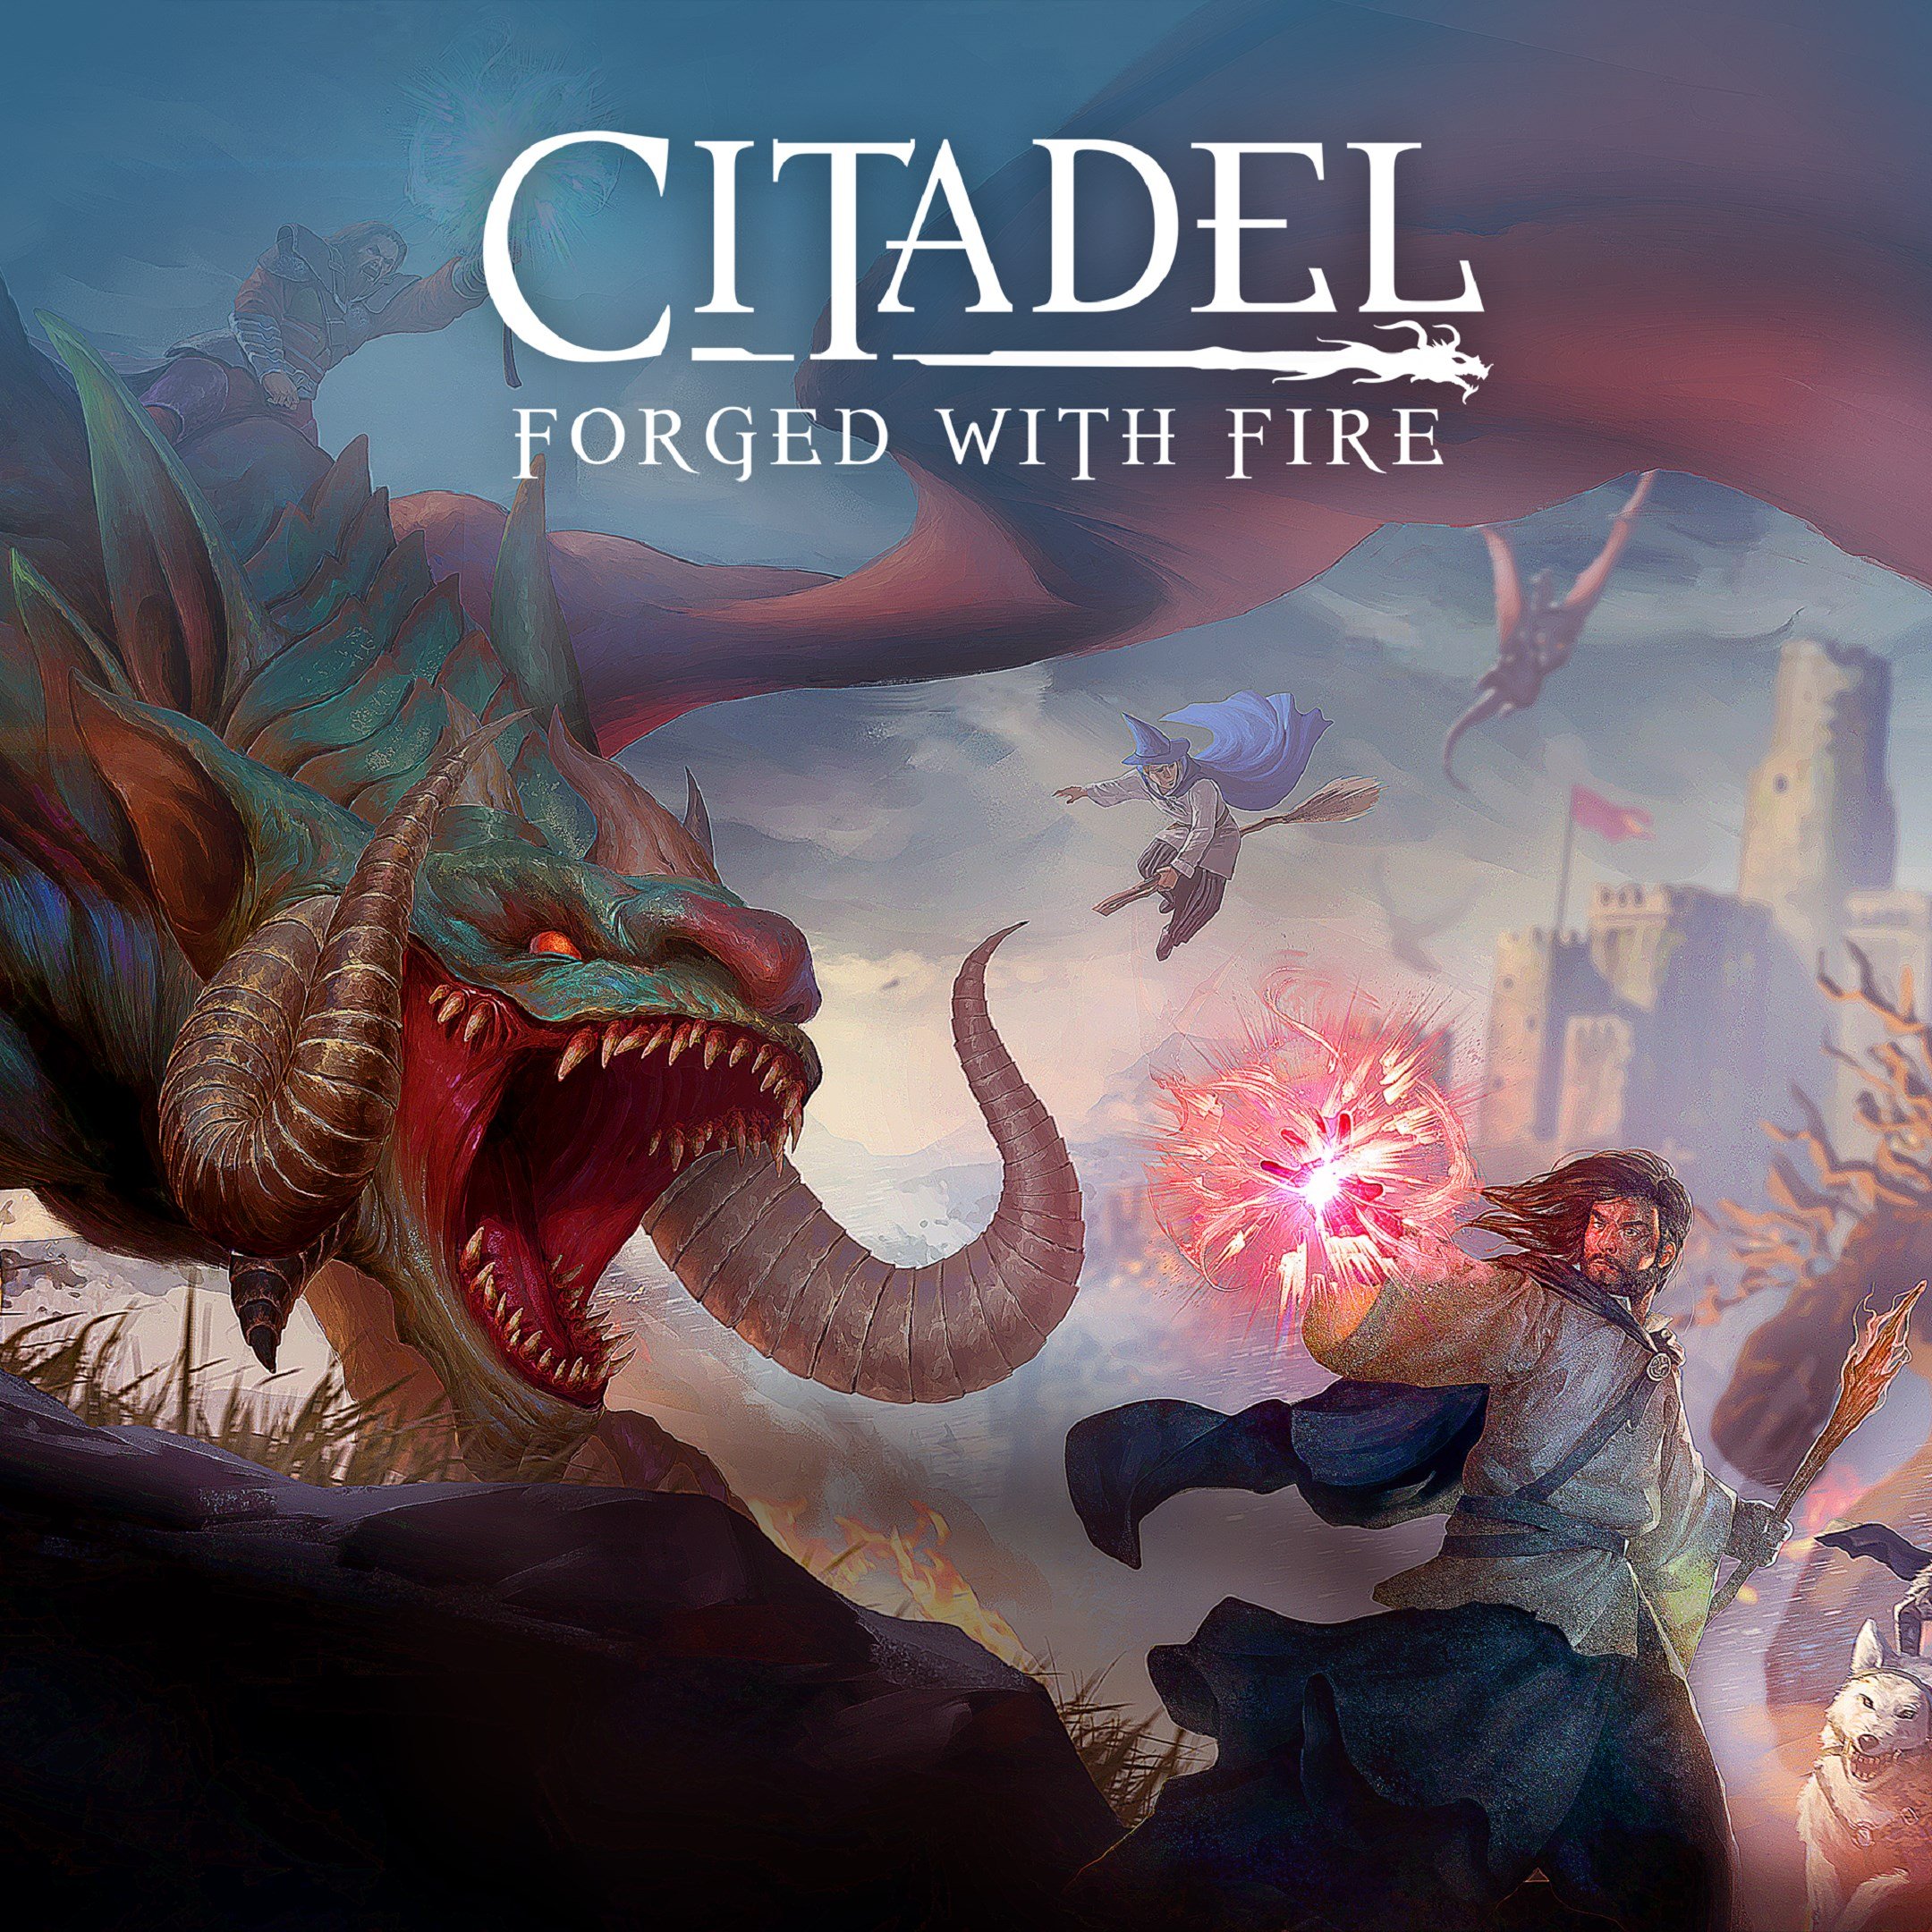 Boxart for Citadel: Forged With Fire